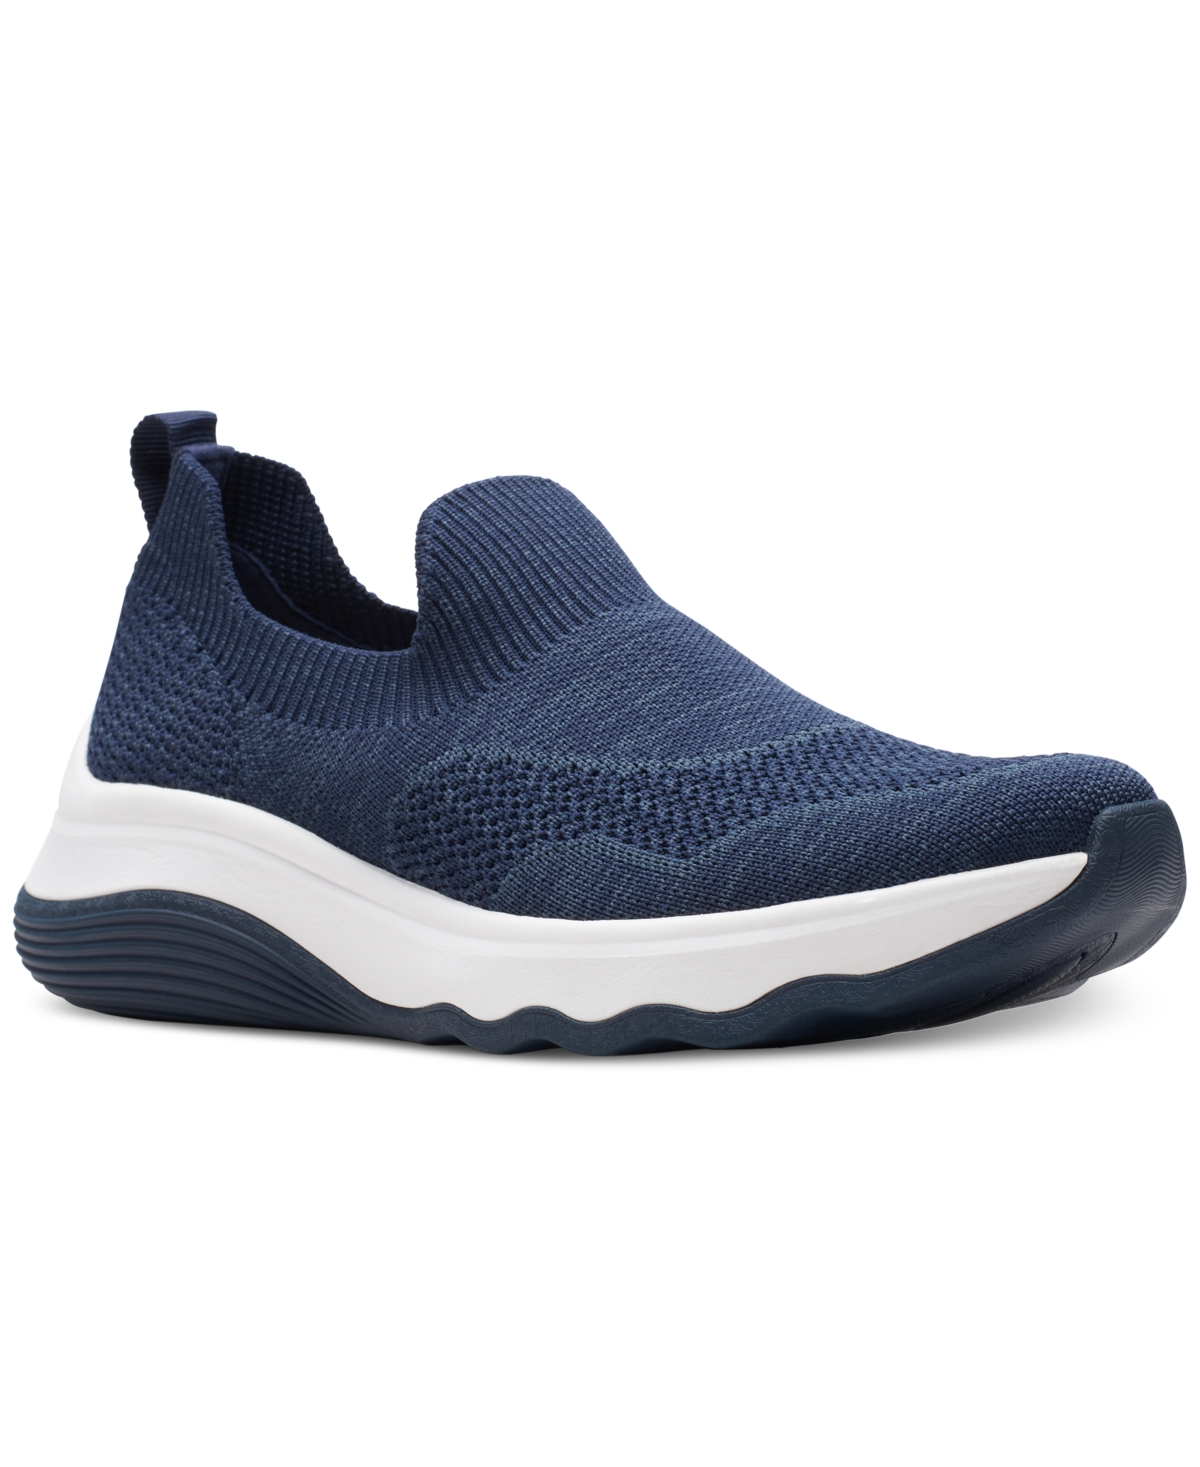 Clarks Women's Circuit Path Knit Slip-on Wedge Shoes In Navy Knit